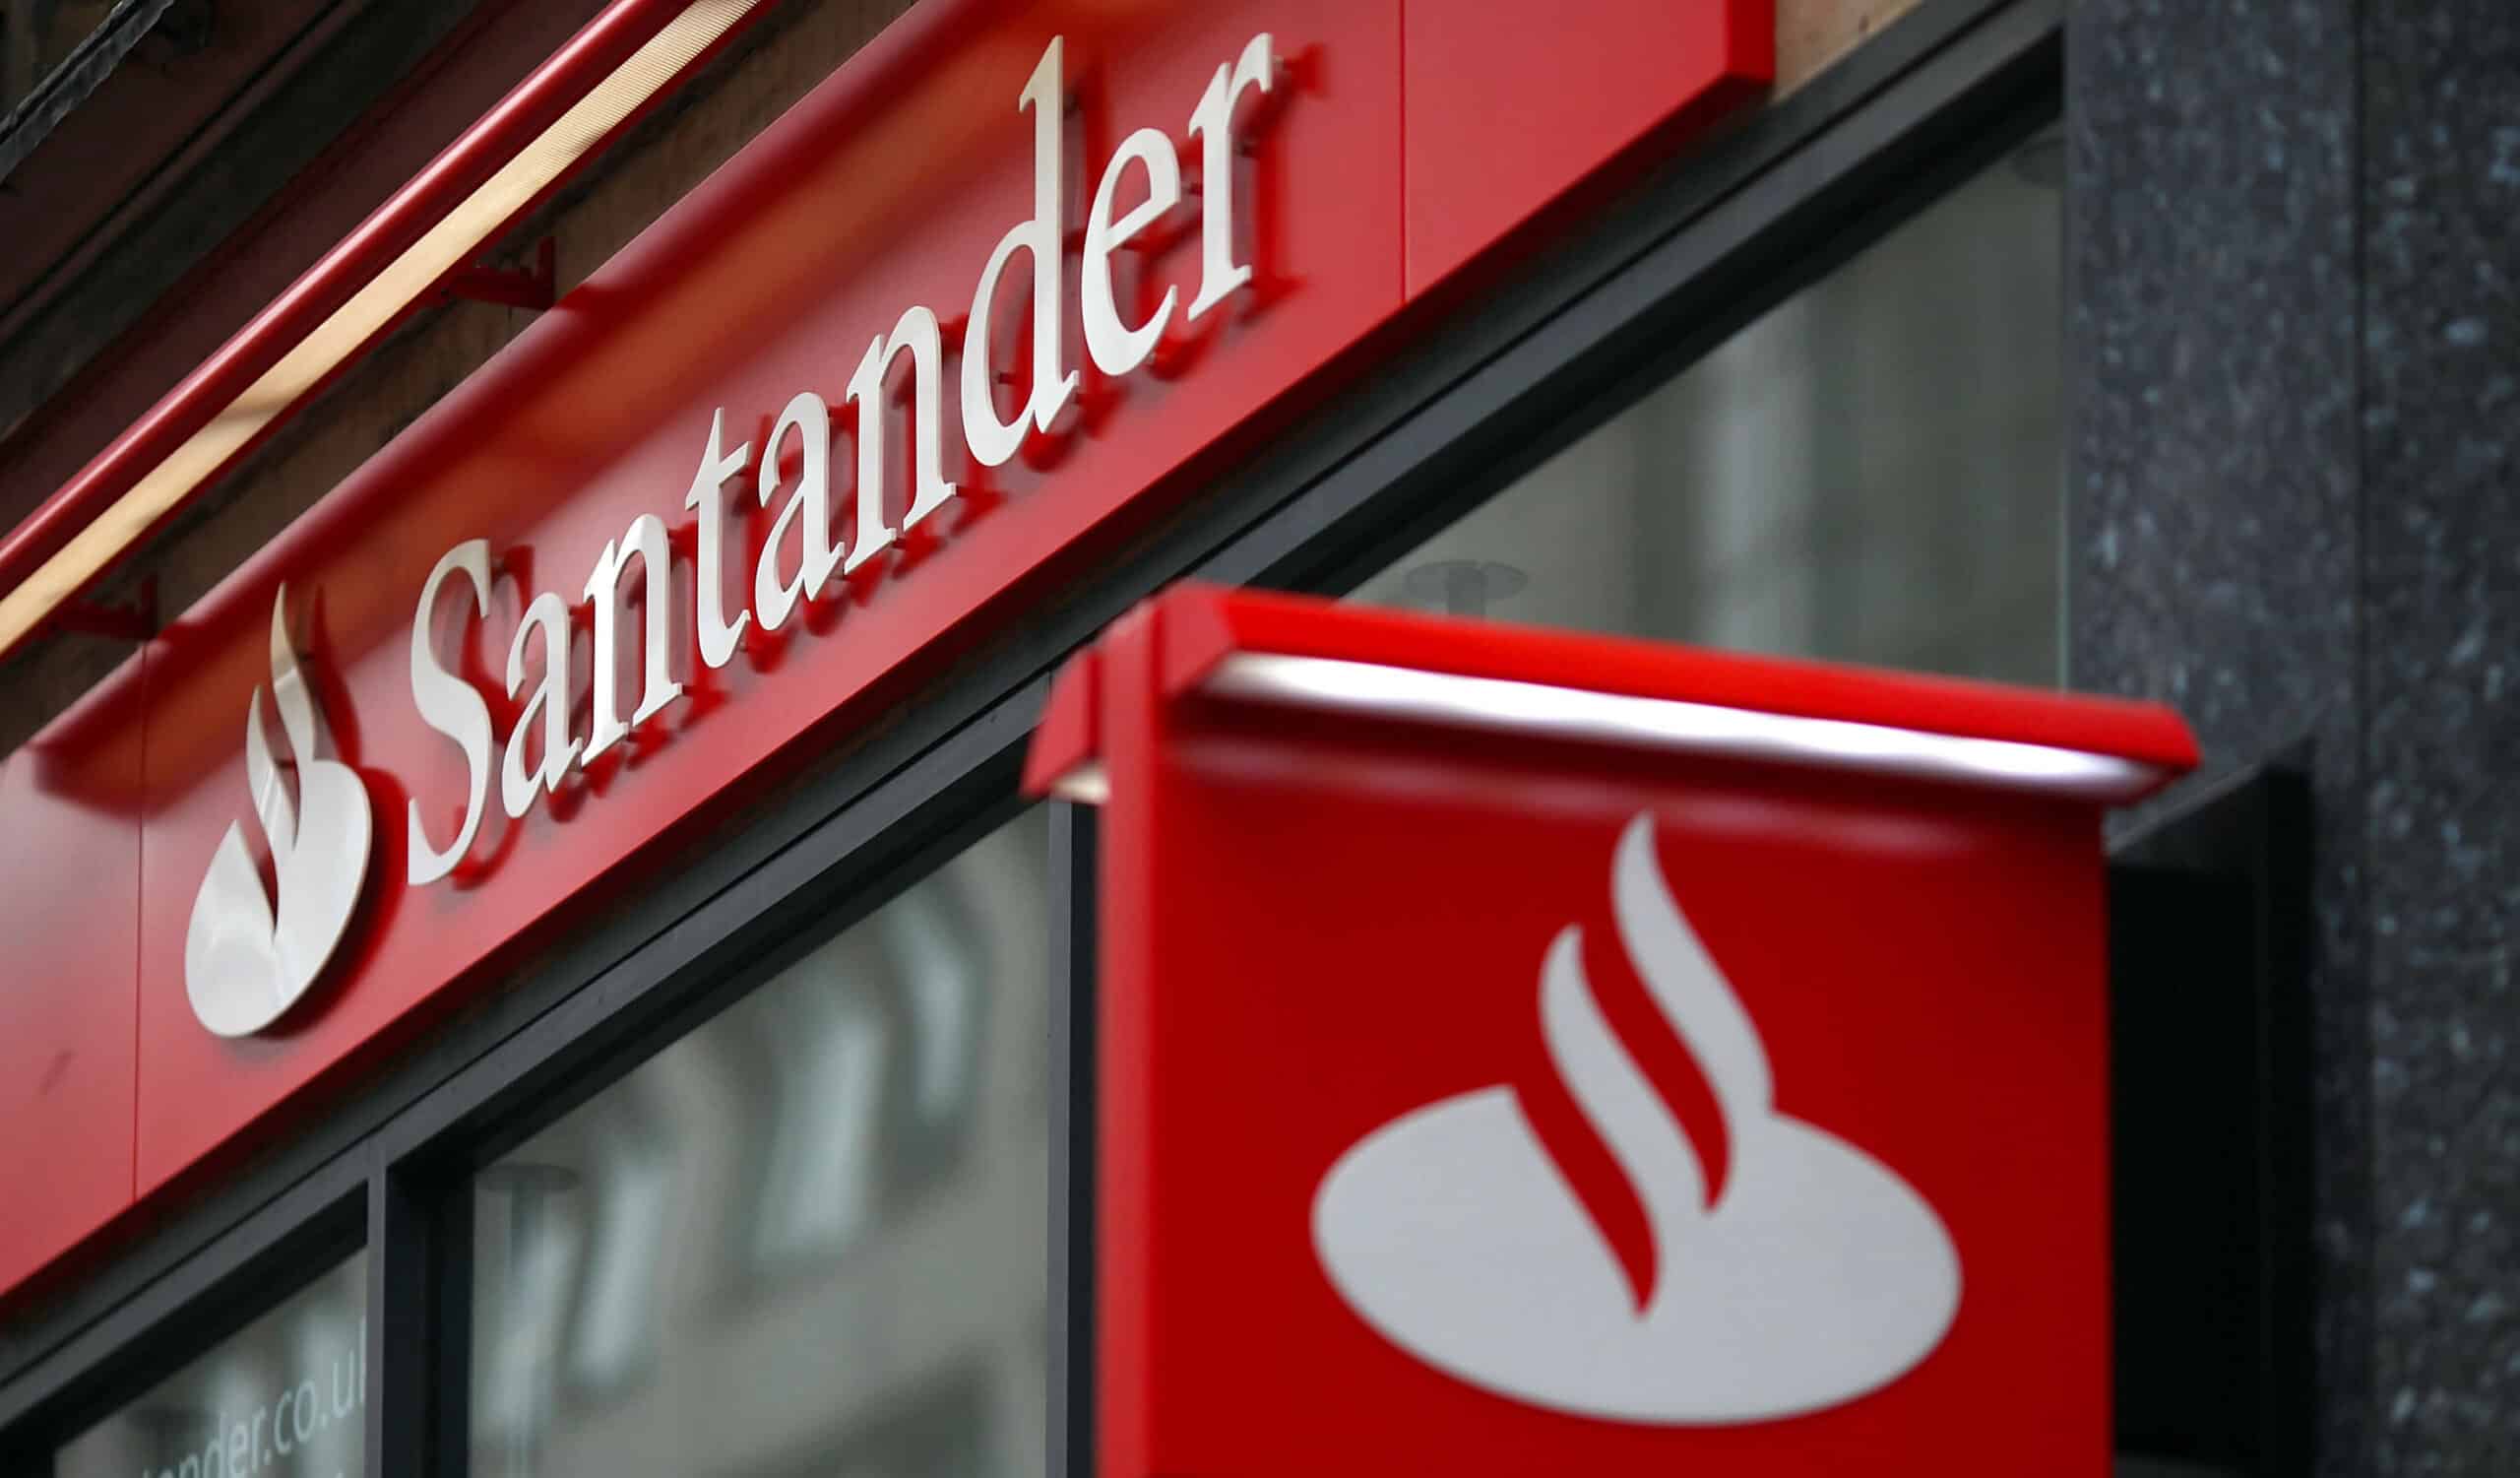 Banco Santander opens 50 thousand vacancies in free courses in the area of technology